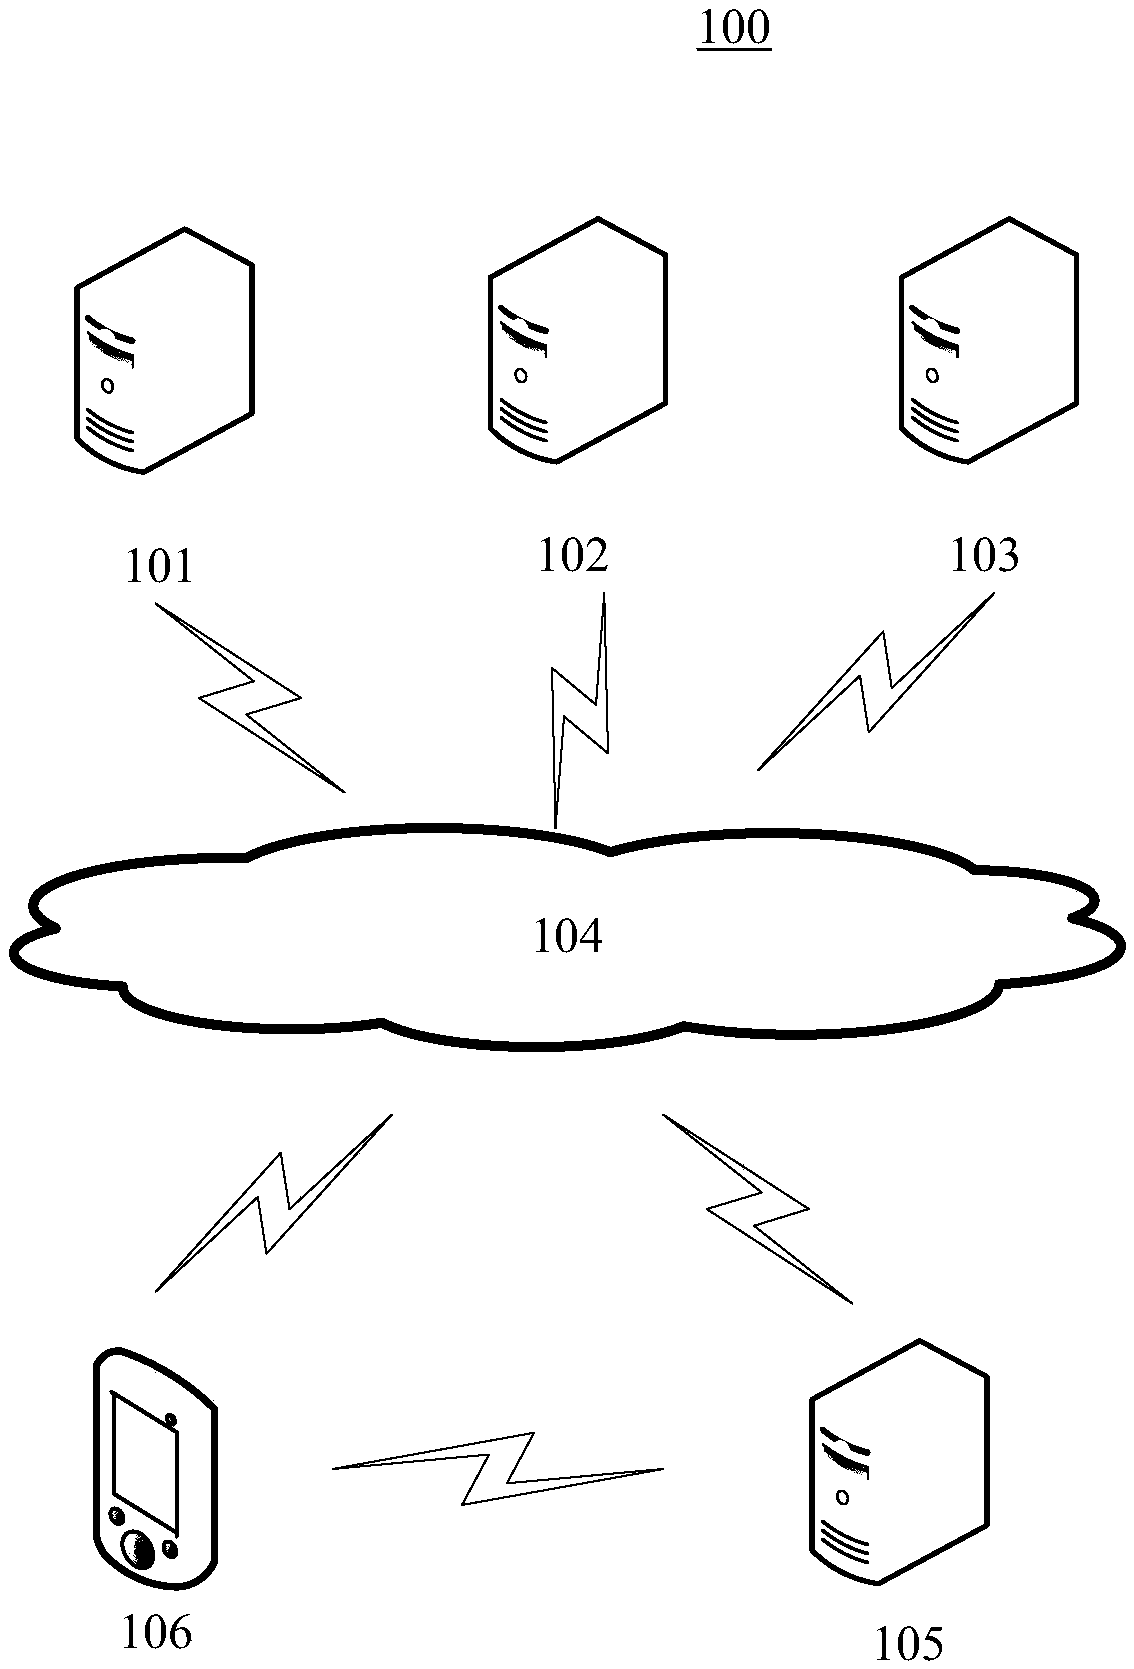 Load balancing method and device for monitoring server and load balancing method and device for server